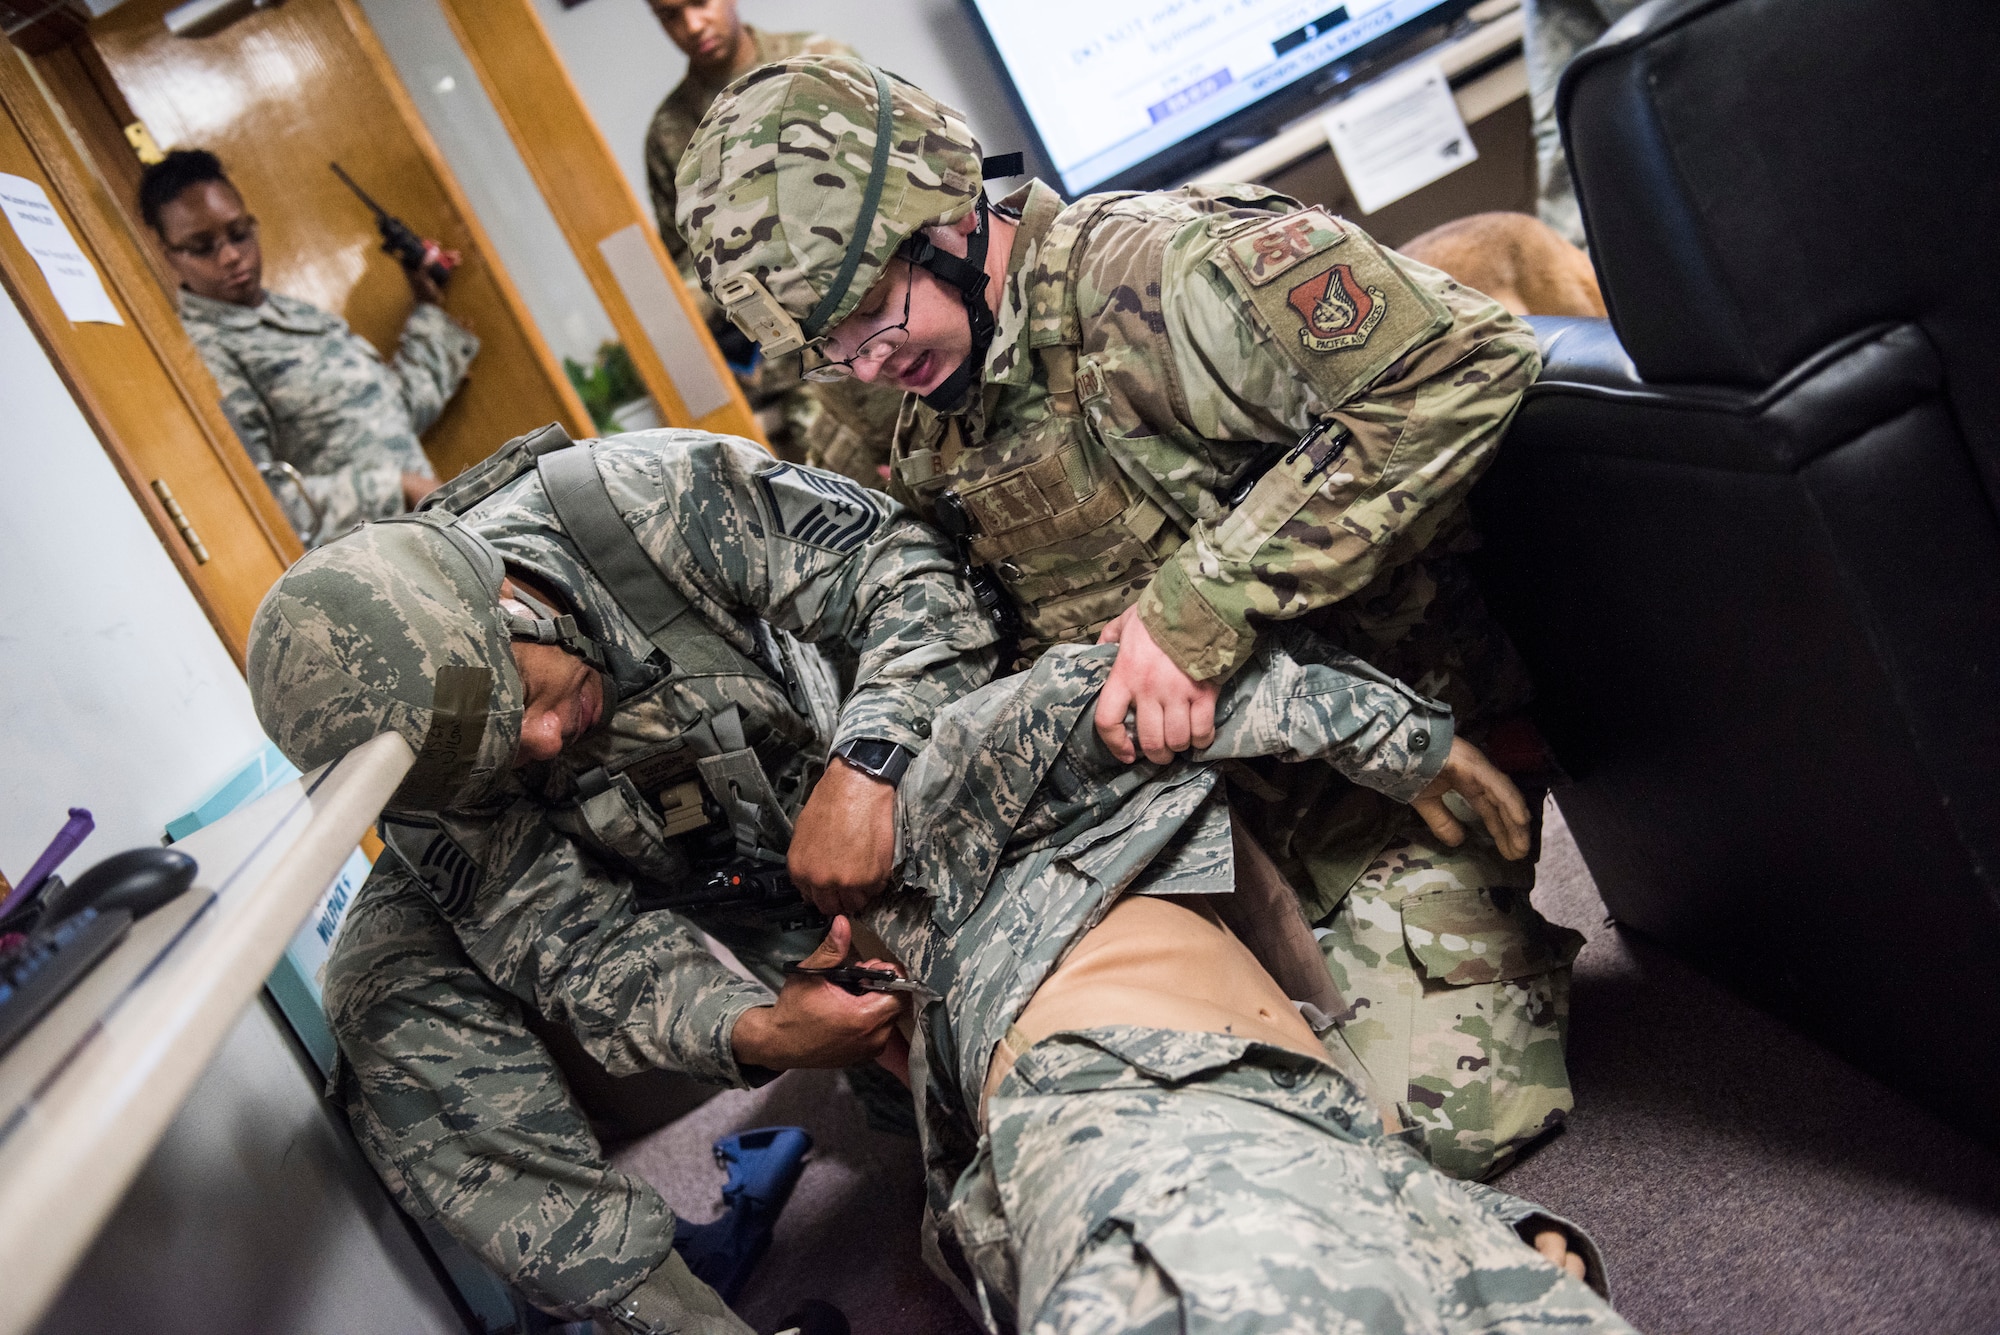 U.S. Air Force Master Sgt. Marquis Wilson (right), and Staff Sgt. Charles Billups (left), 8th Security Forces Squadron members, perform first aid on a simulated victim during an exercise at Kunsan Air Base, Republic of Korea, July 23, 2019. Once alerted, 8th SFS responded with precision to a simulated active shooter call, neutralized the simulated threat and secured the area. (U.S. Air Force photo by Senior Airman Stefan Alvarez)